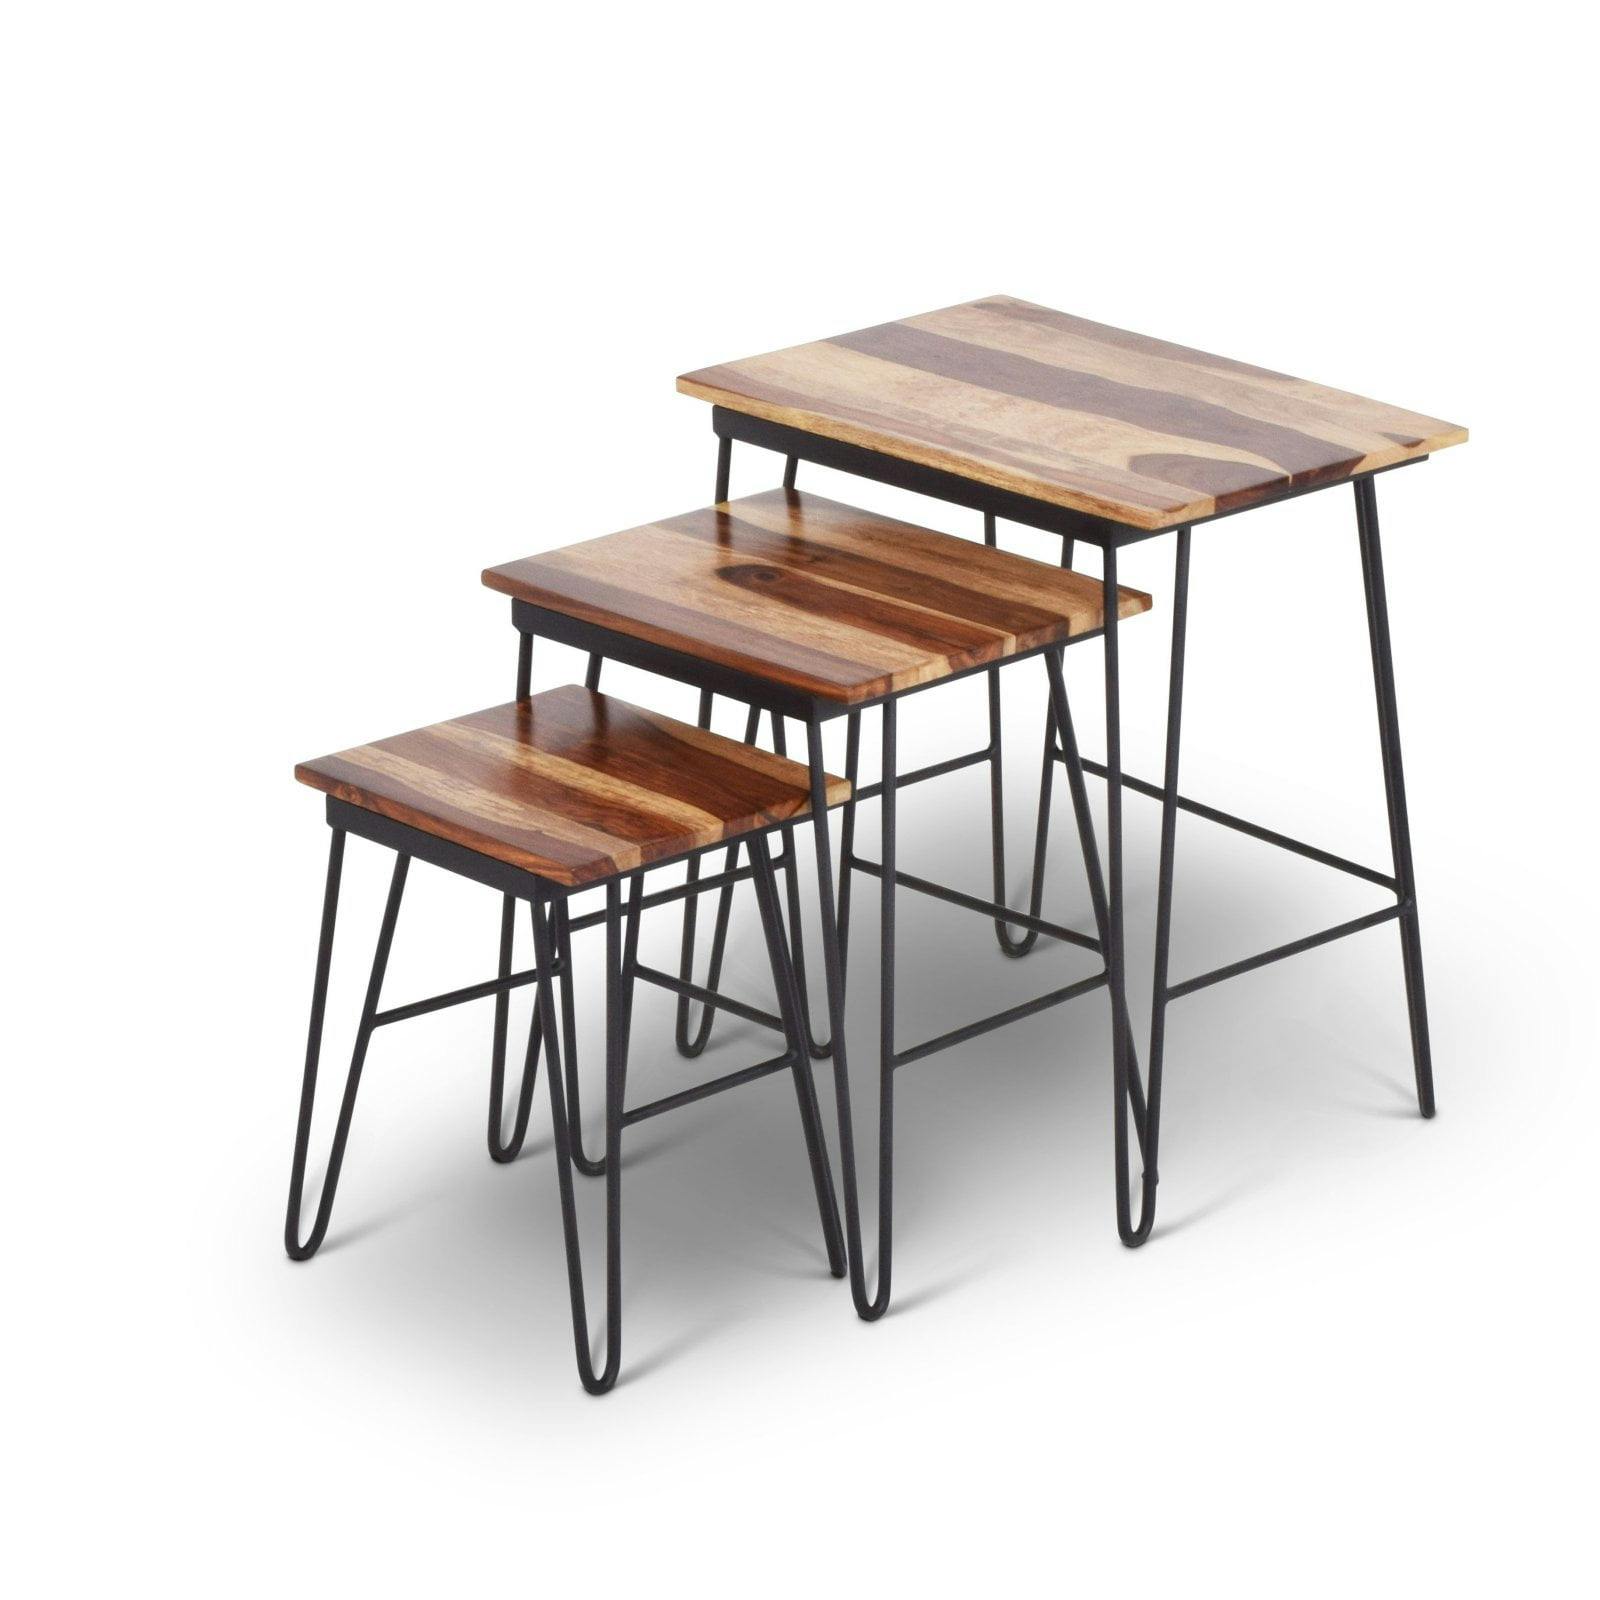 Tristan Industrial Nesting End Tables in Sheesham Wood and Black Metal